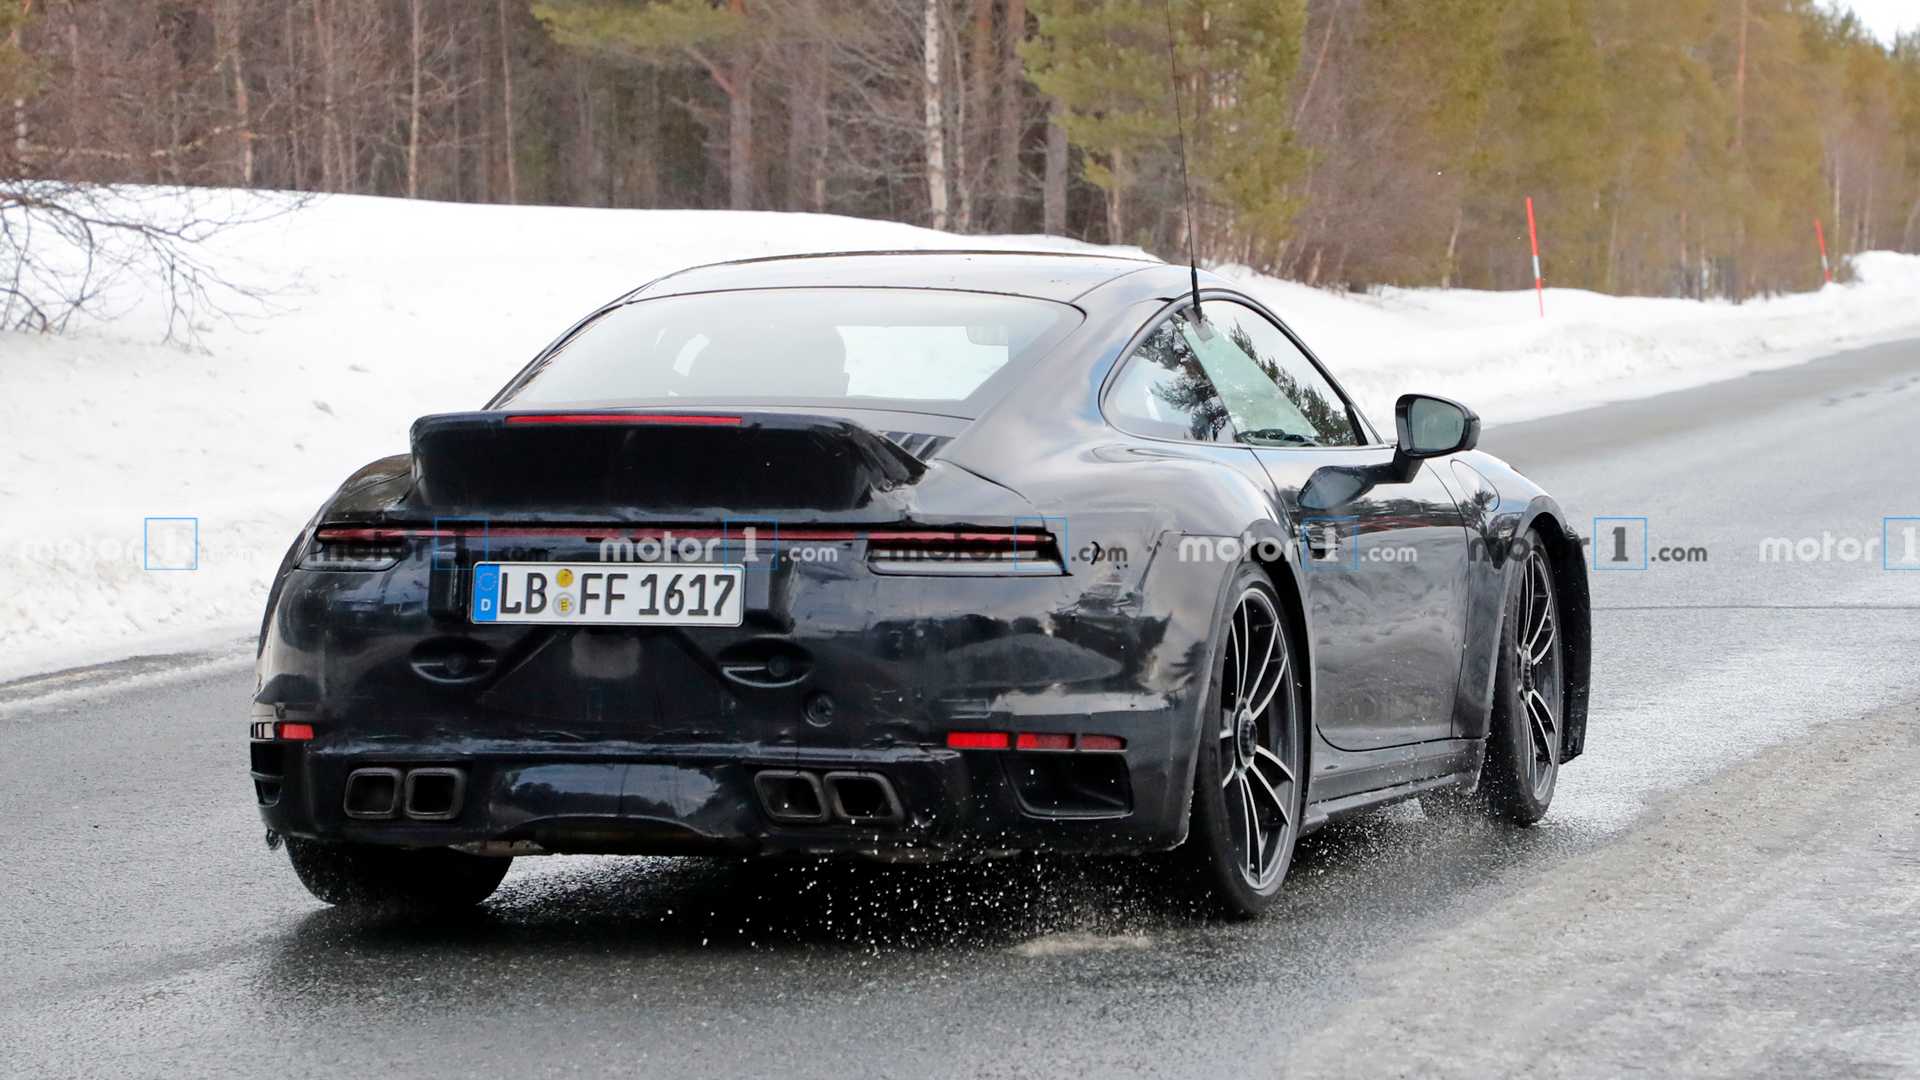 New Porsche 911 Turbo S Caught Up Close With Big Ducktail Spoiler